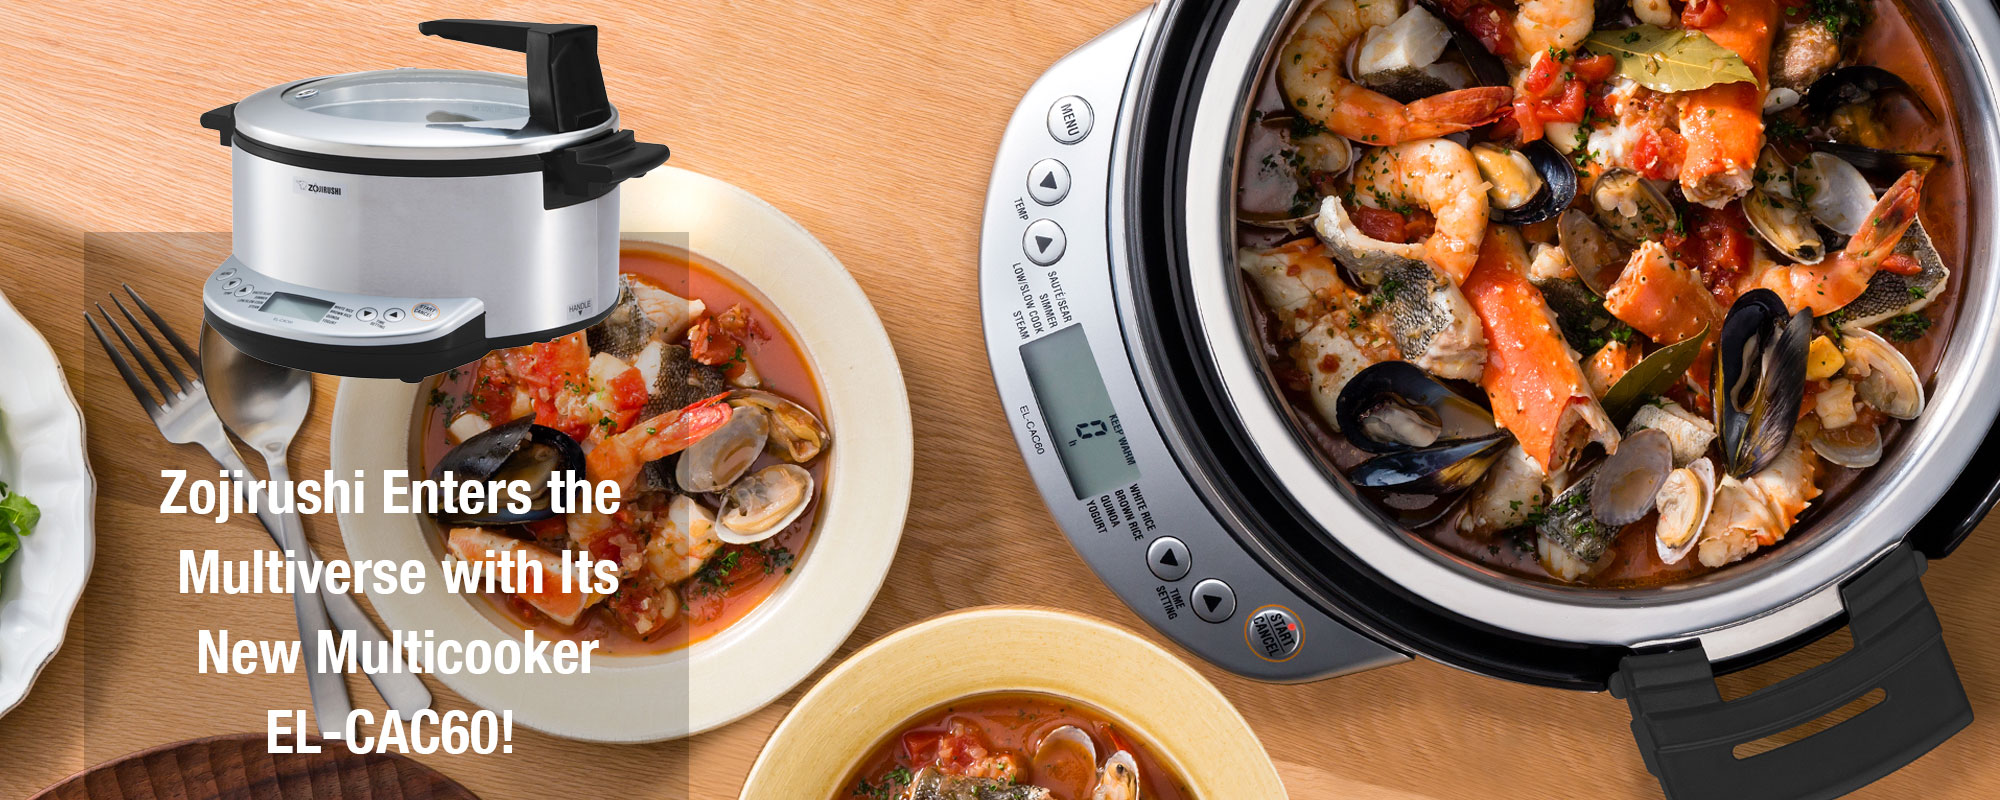 Zojirushi Enters the Multiverse with its New Multicooker!